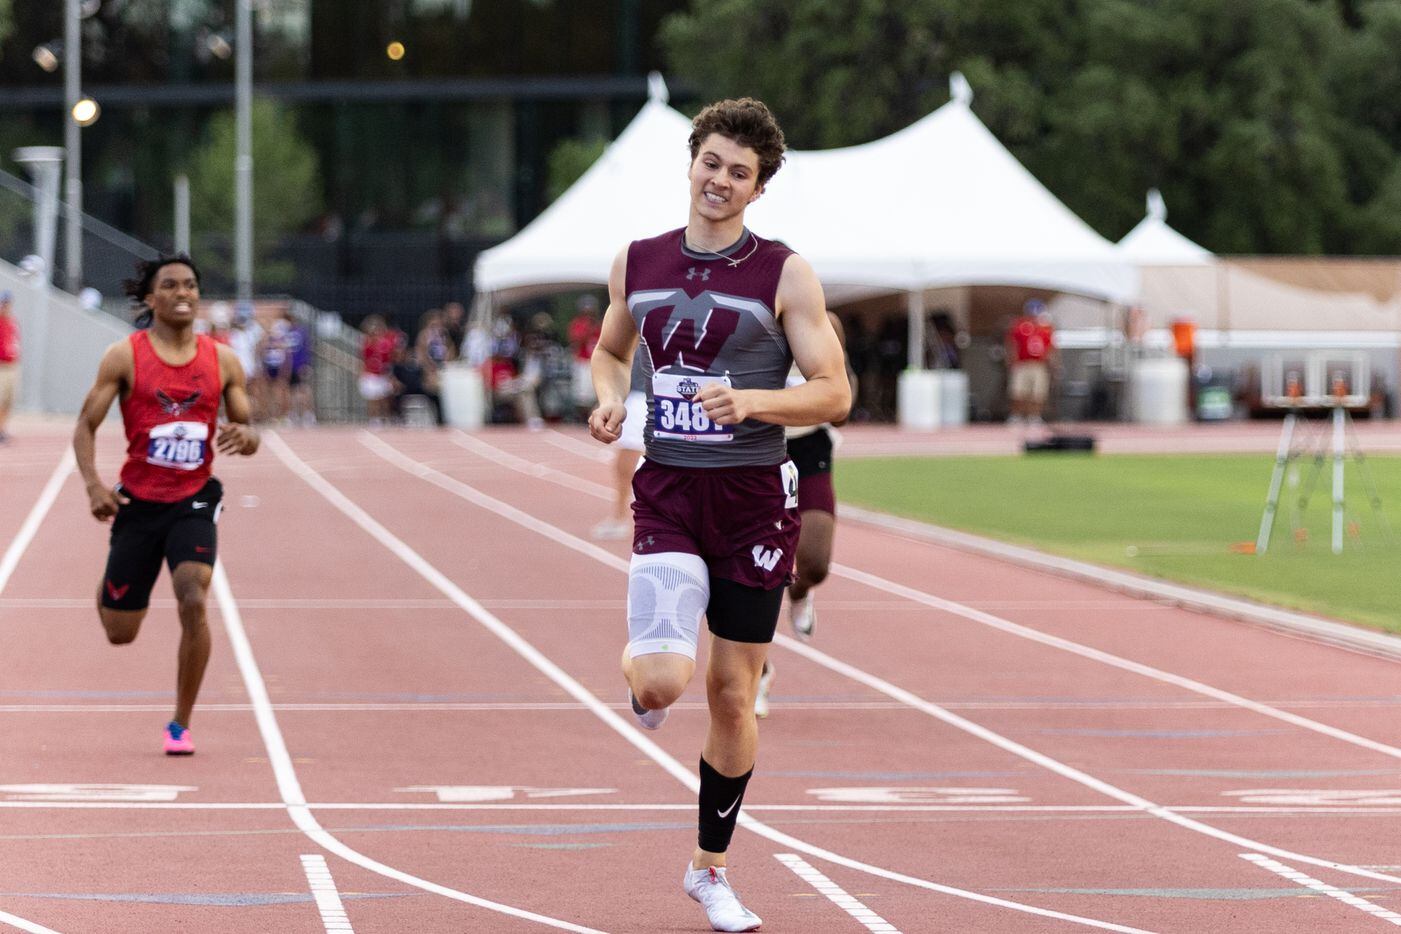 Logan Popelka reacts after crossing the finish line in the boys’ 400-meter dash at the UIL...